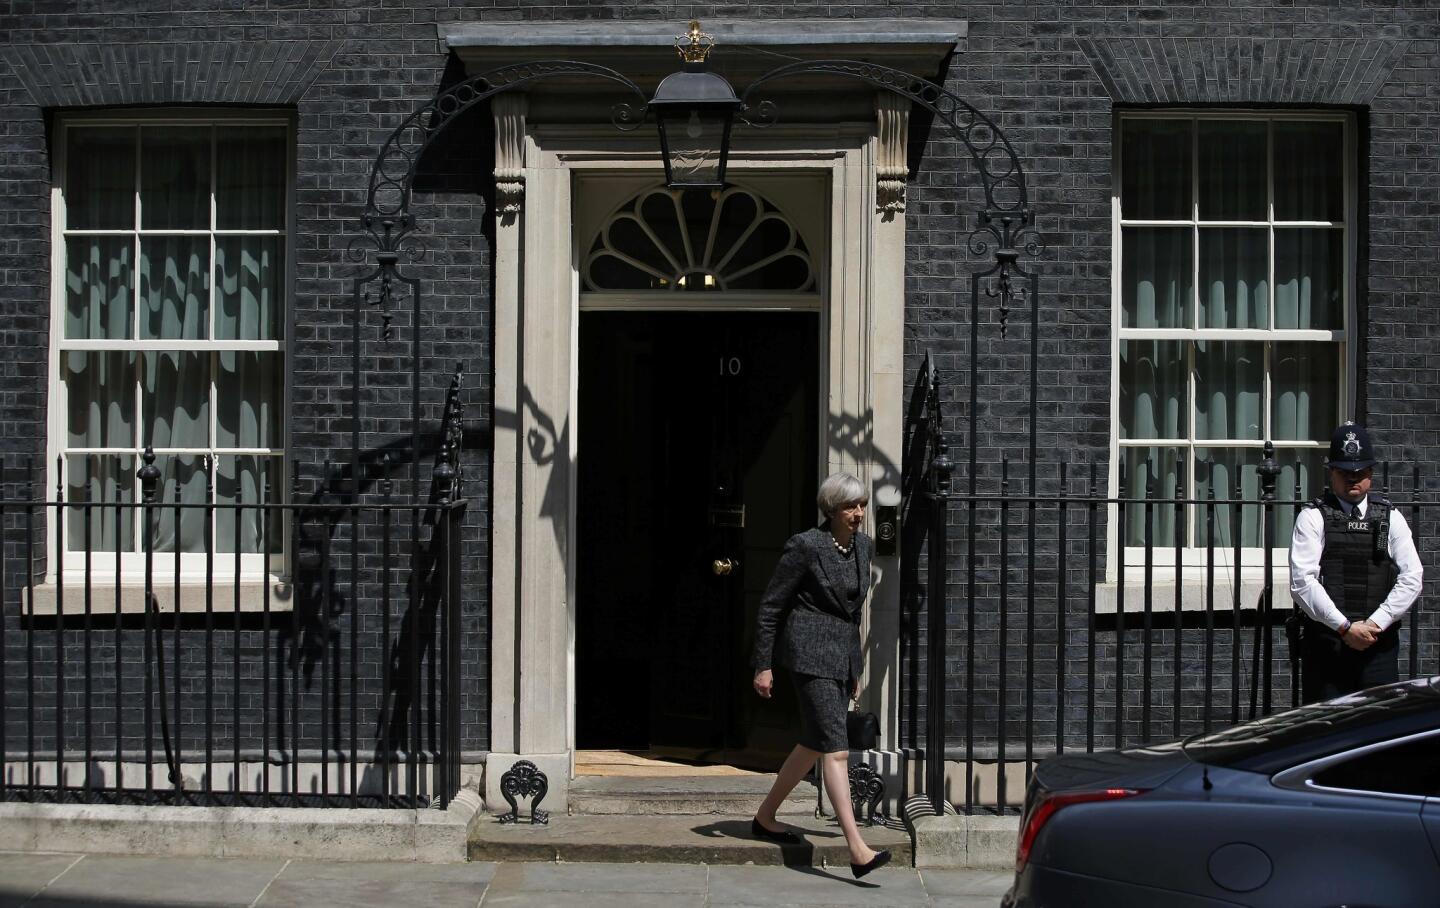 Britain's Prime Minister Theresa May leaves 10 Downing Street in central London on May 25, 2017. May said she would raise the issue of leaks from a probe into the Manchester terror attack that have infuriated British authorities with their U.S. counterparts ahead of her departure for a NATO summit in Brussels.